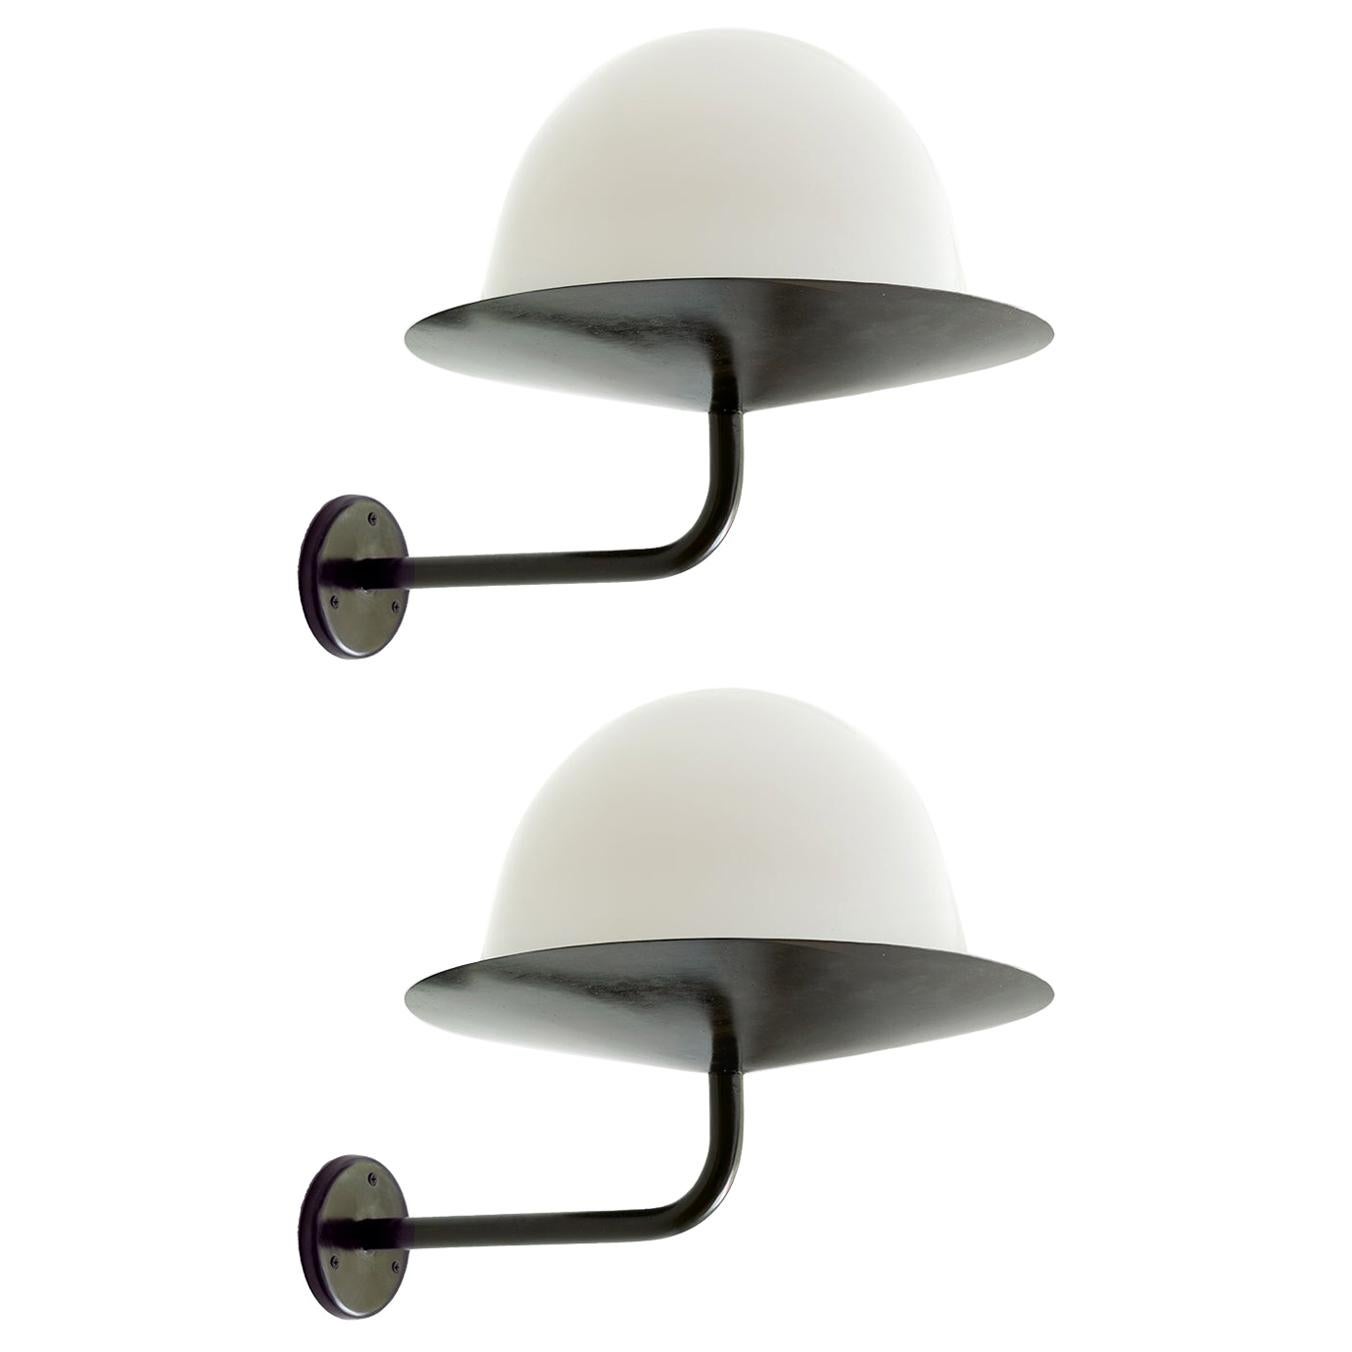 Pair of Scandinavian Modernist Sconces with Dome Shaped Glass Shades